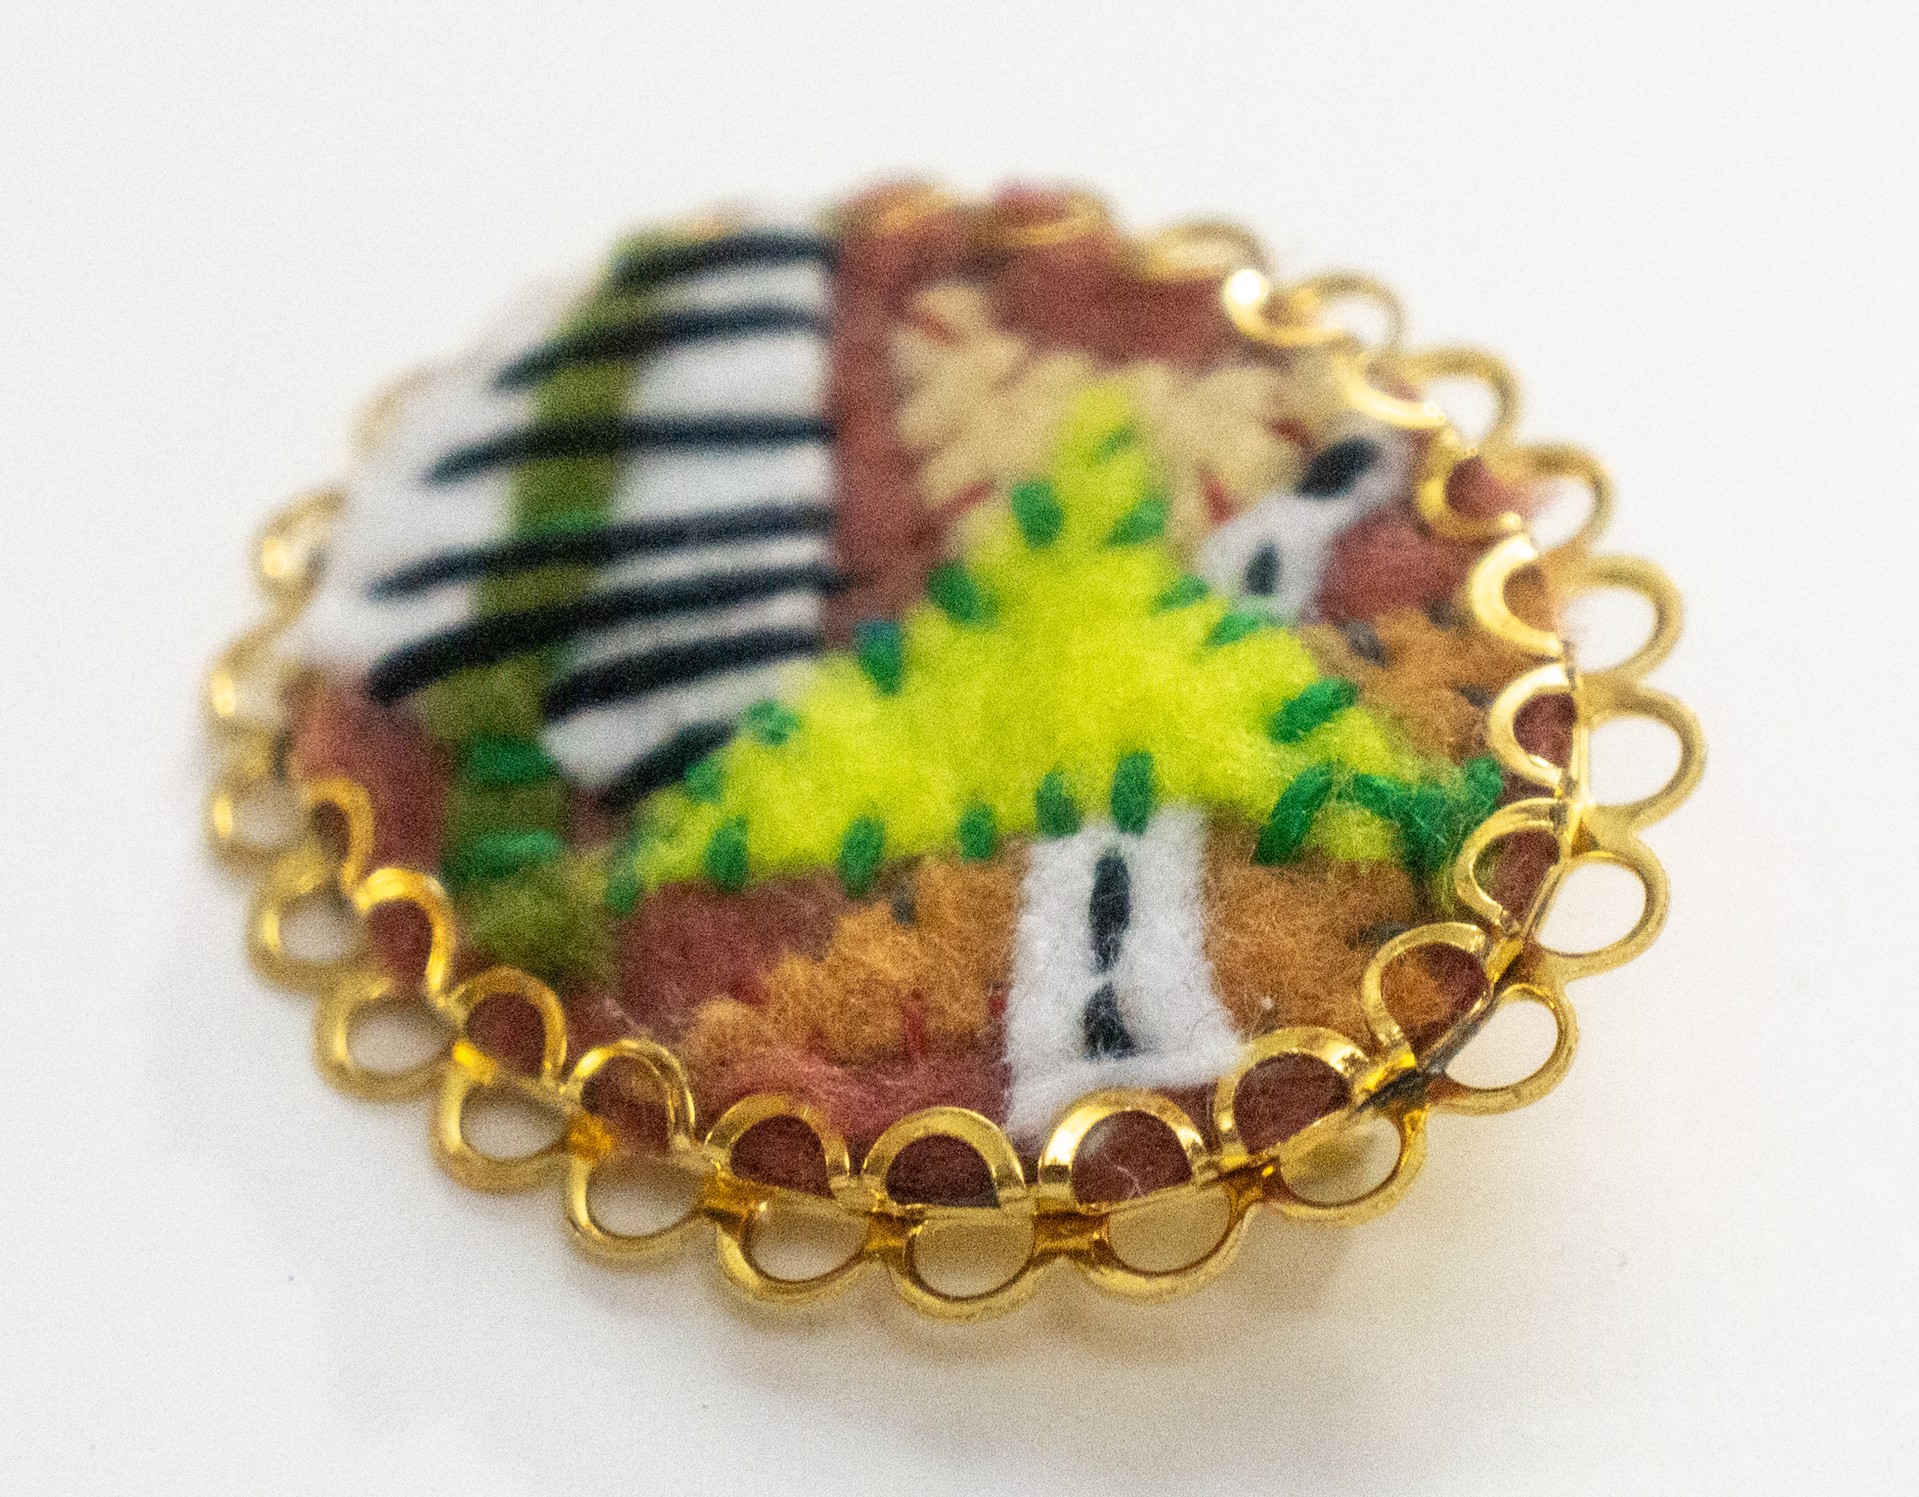 Green and striped brooch by Hattie Lee Mendoza